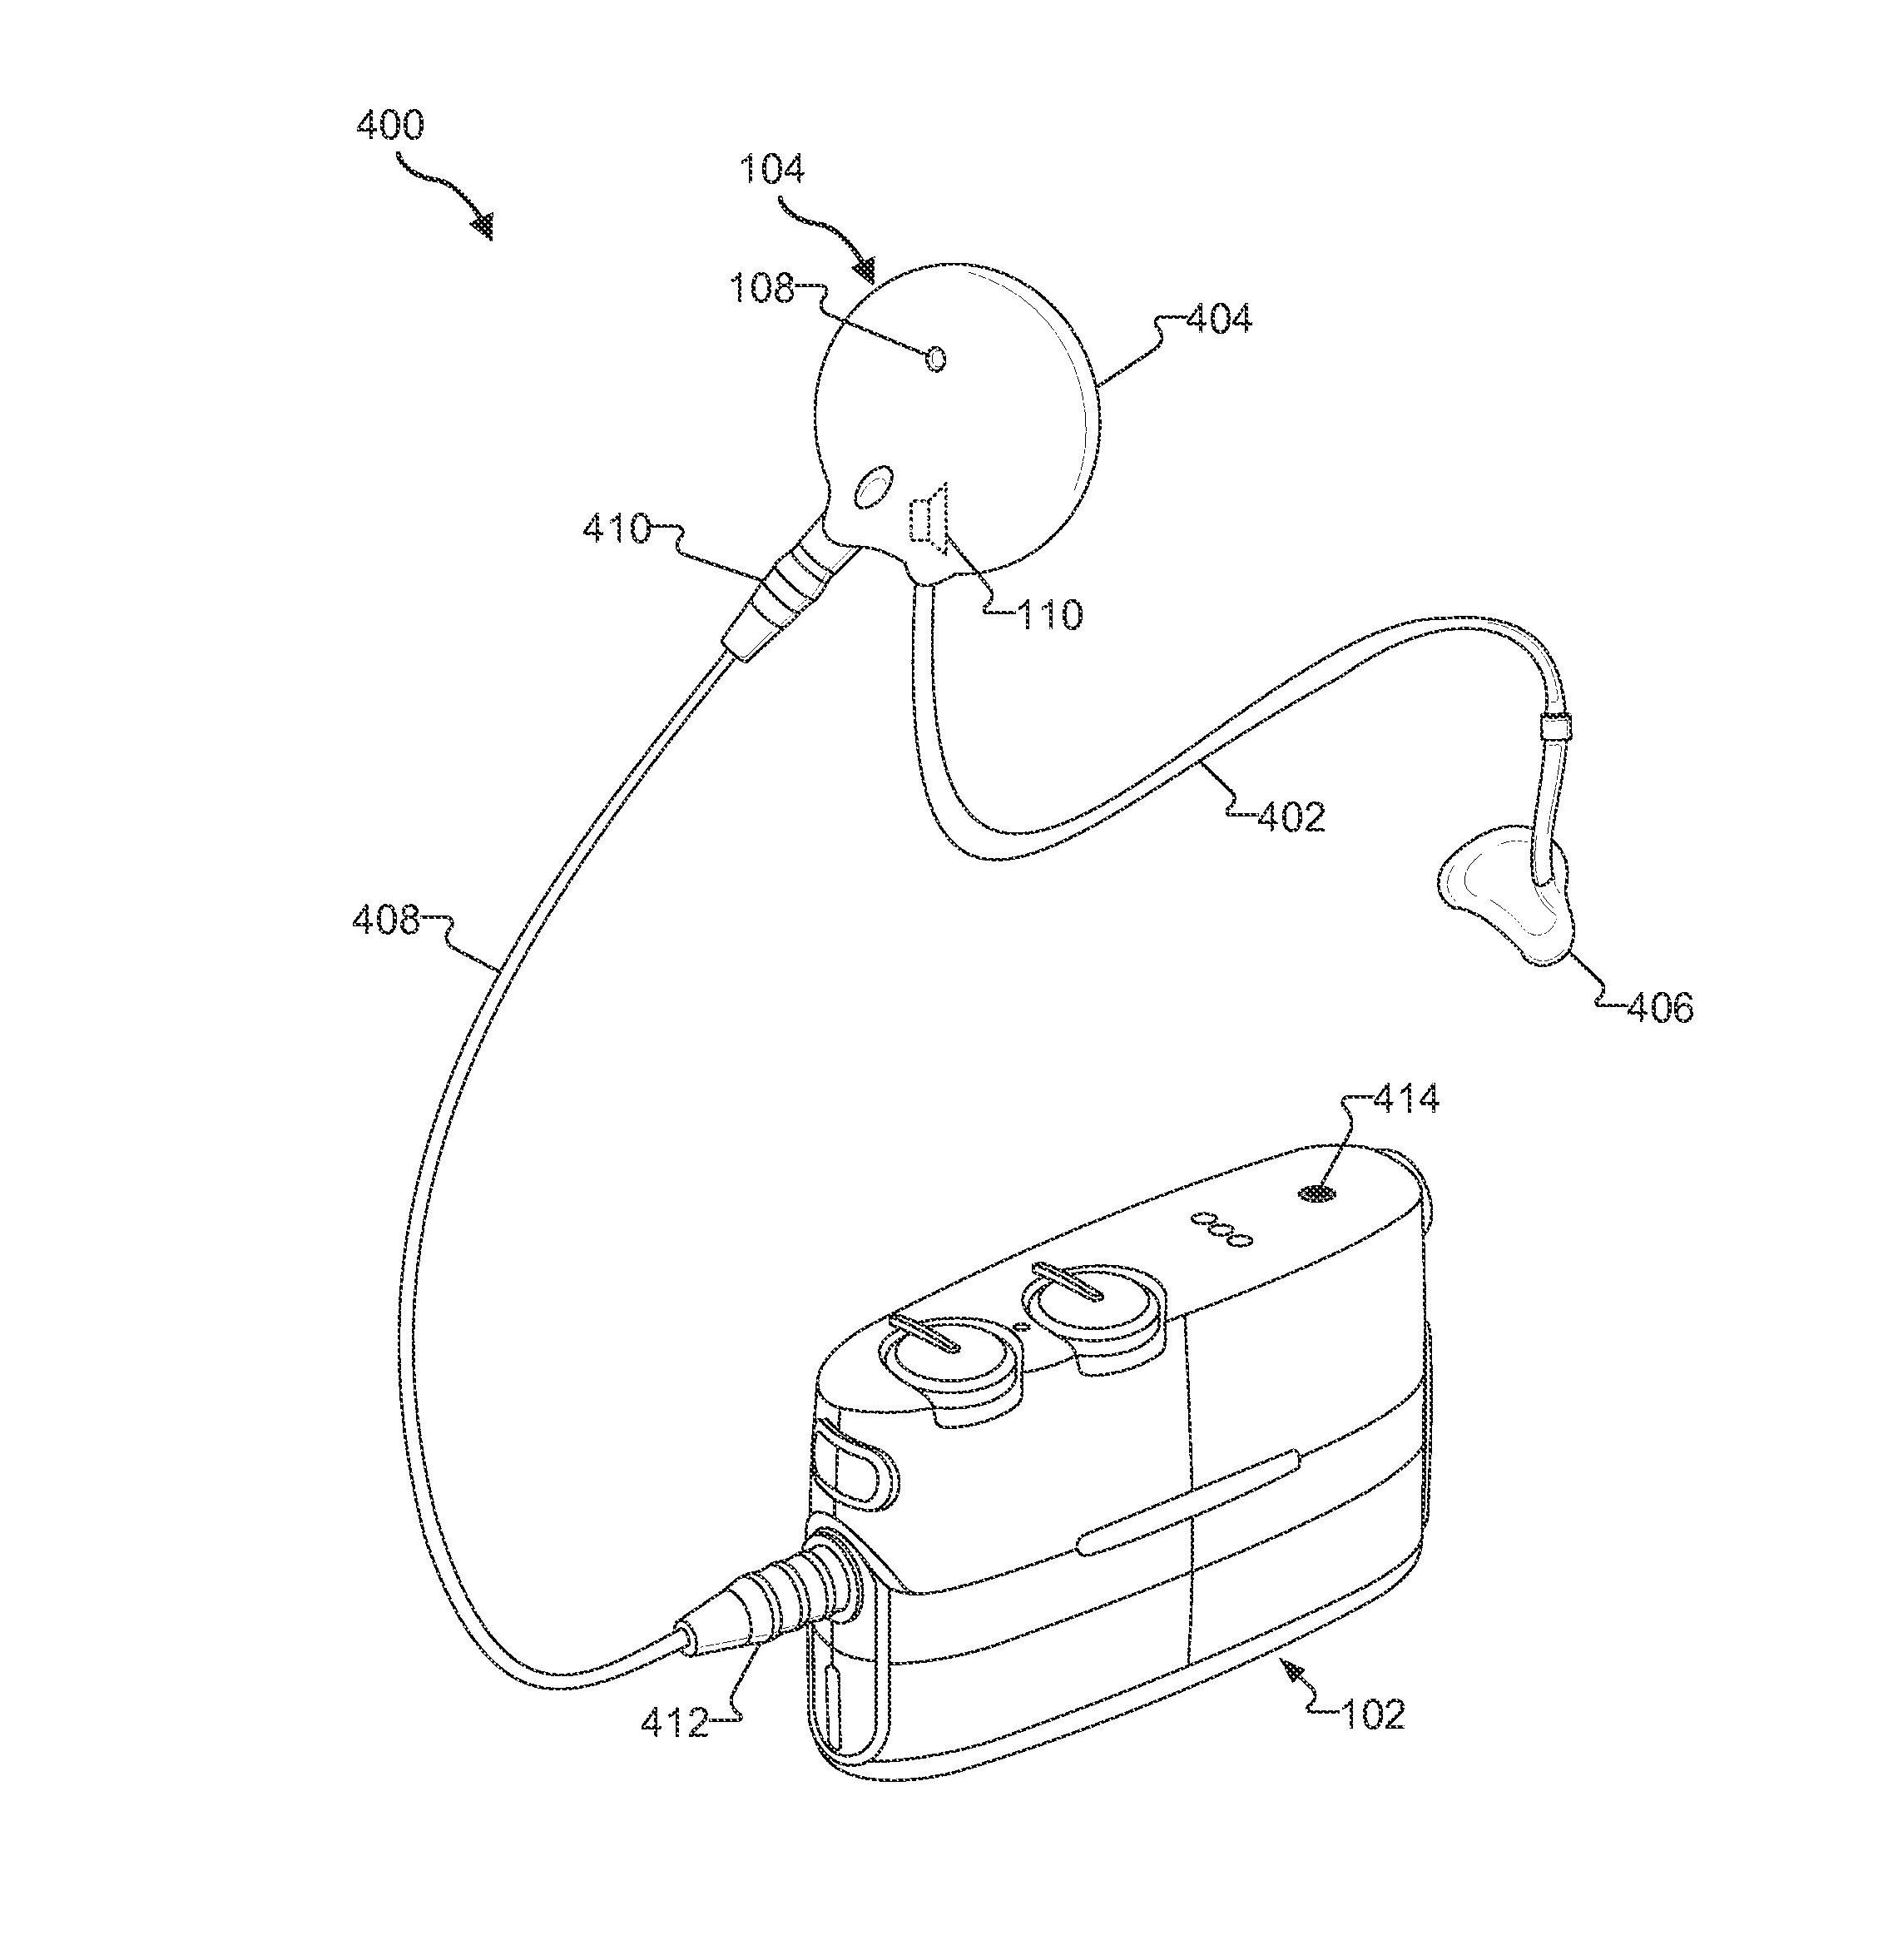 Systems and methods for facilitating electro-acoustic stimulation using an off-the-ear sound processor module